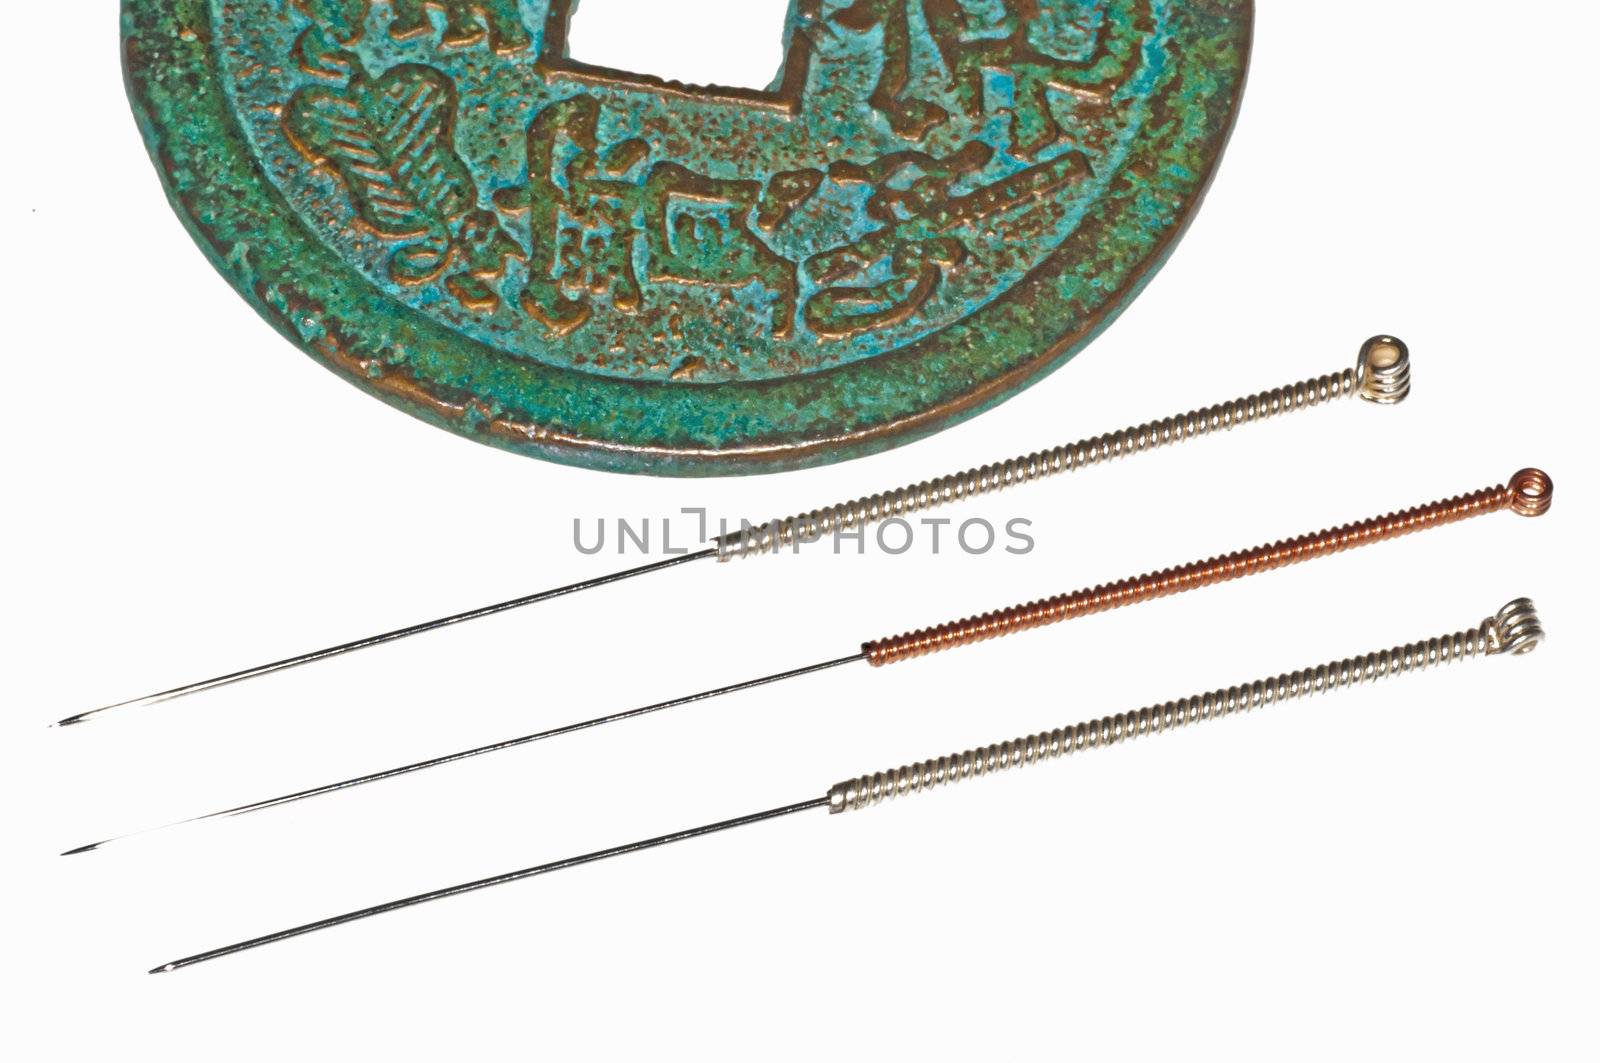 acupuncture needles on chinese coin by Jochen